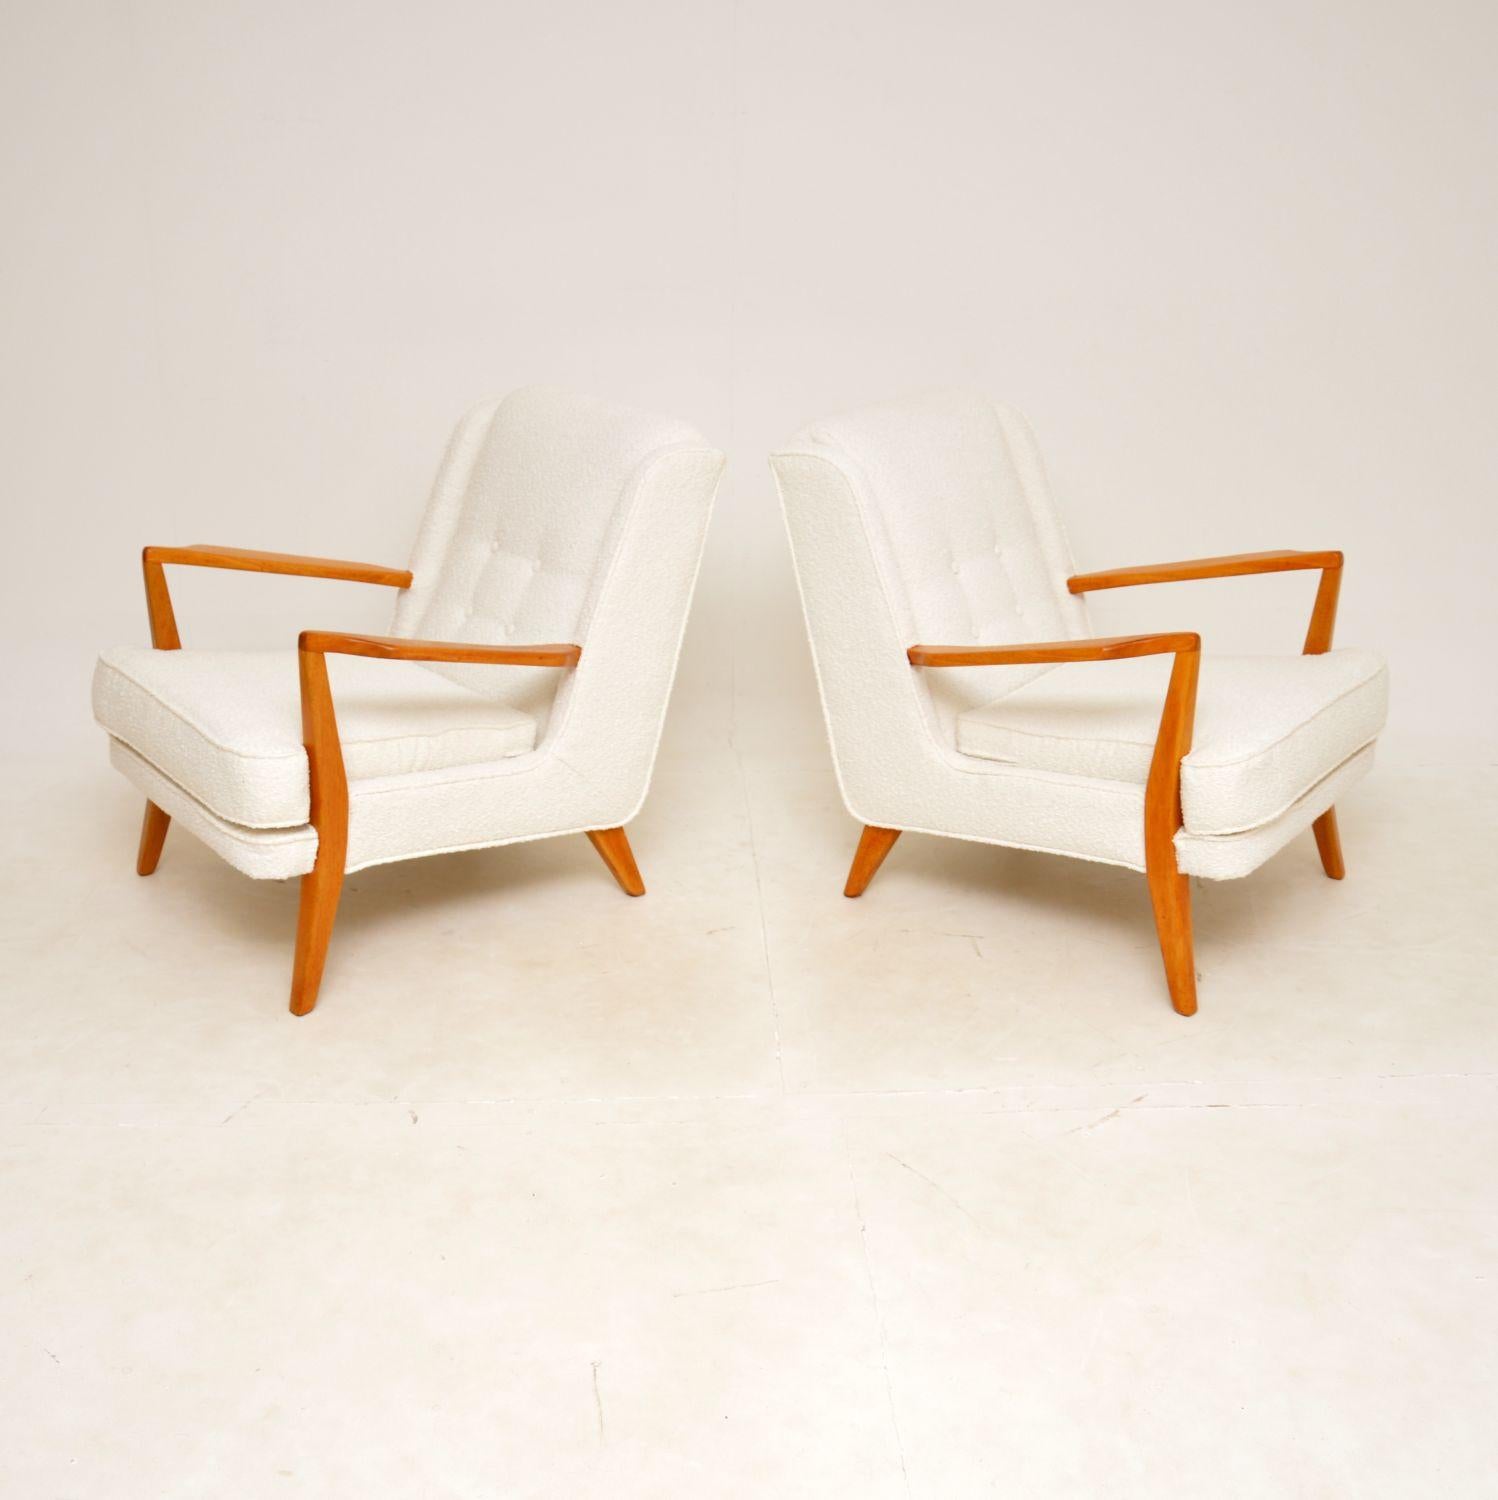 A superb and extremely rare pair of vintage armchairs by G Plan. They were made in England, and they date from the 1950-60s.

The quality is outstanding, they are very stylish and comfortable. The frames are a light solid wood, with amazing angular